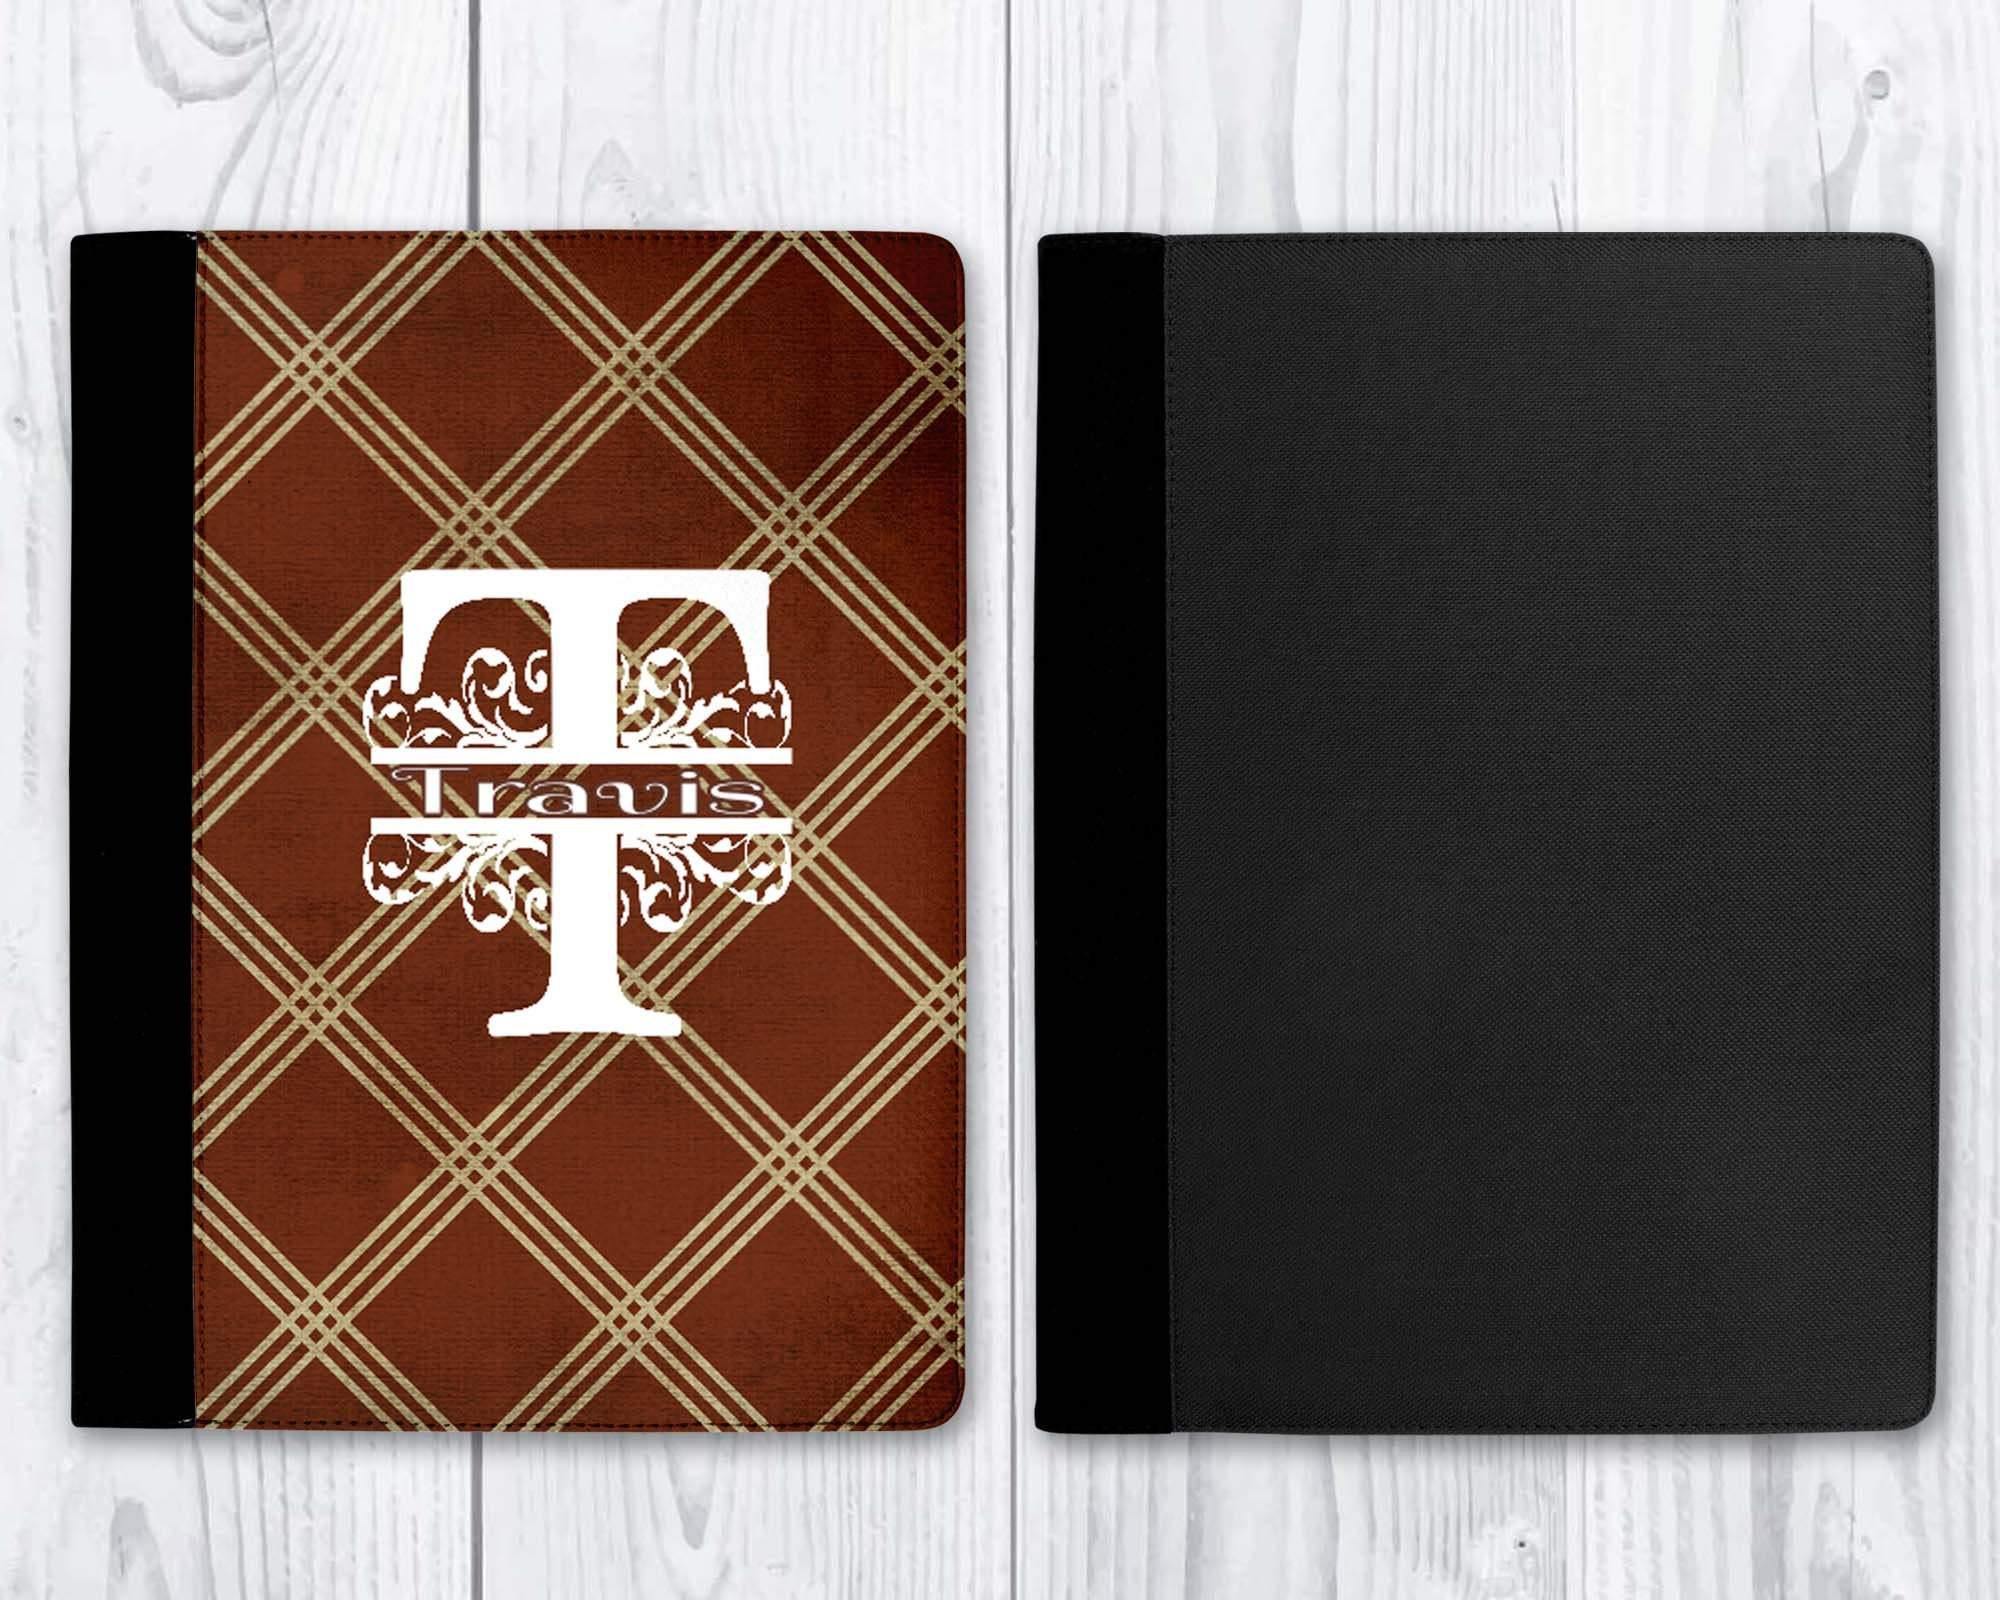 Customized Notebooks | Personalized Office Accessories | Personalized Journal | Brown Argyle - This & That Solutions - Customized Notebooks | Personalized Office Accessories | Personalized Journal | Brown Argyle - Personalized Gifts & Custom Home Decor